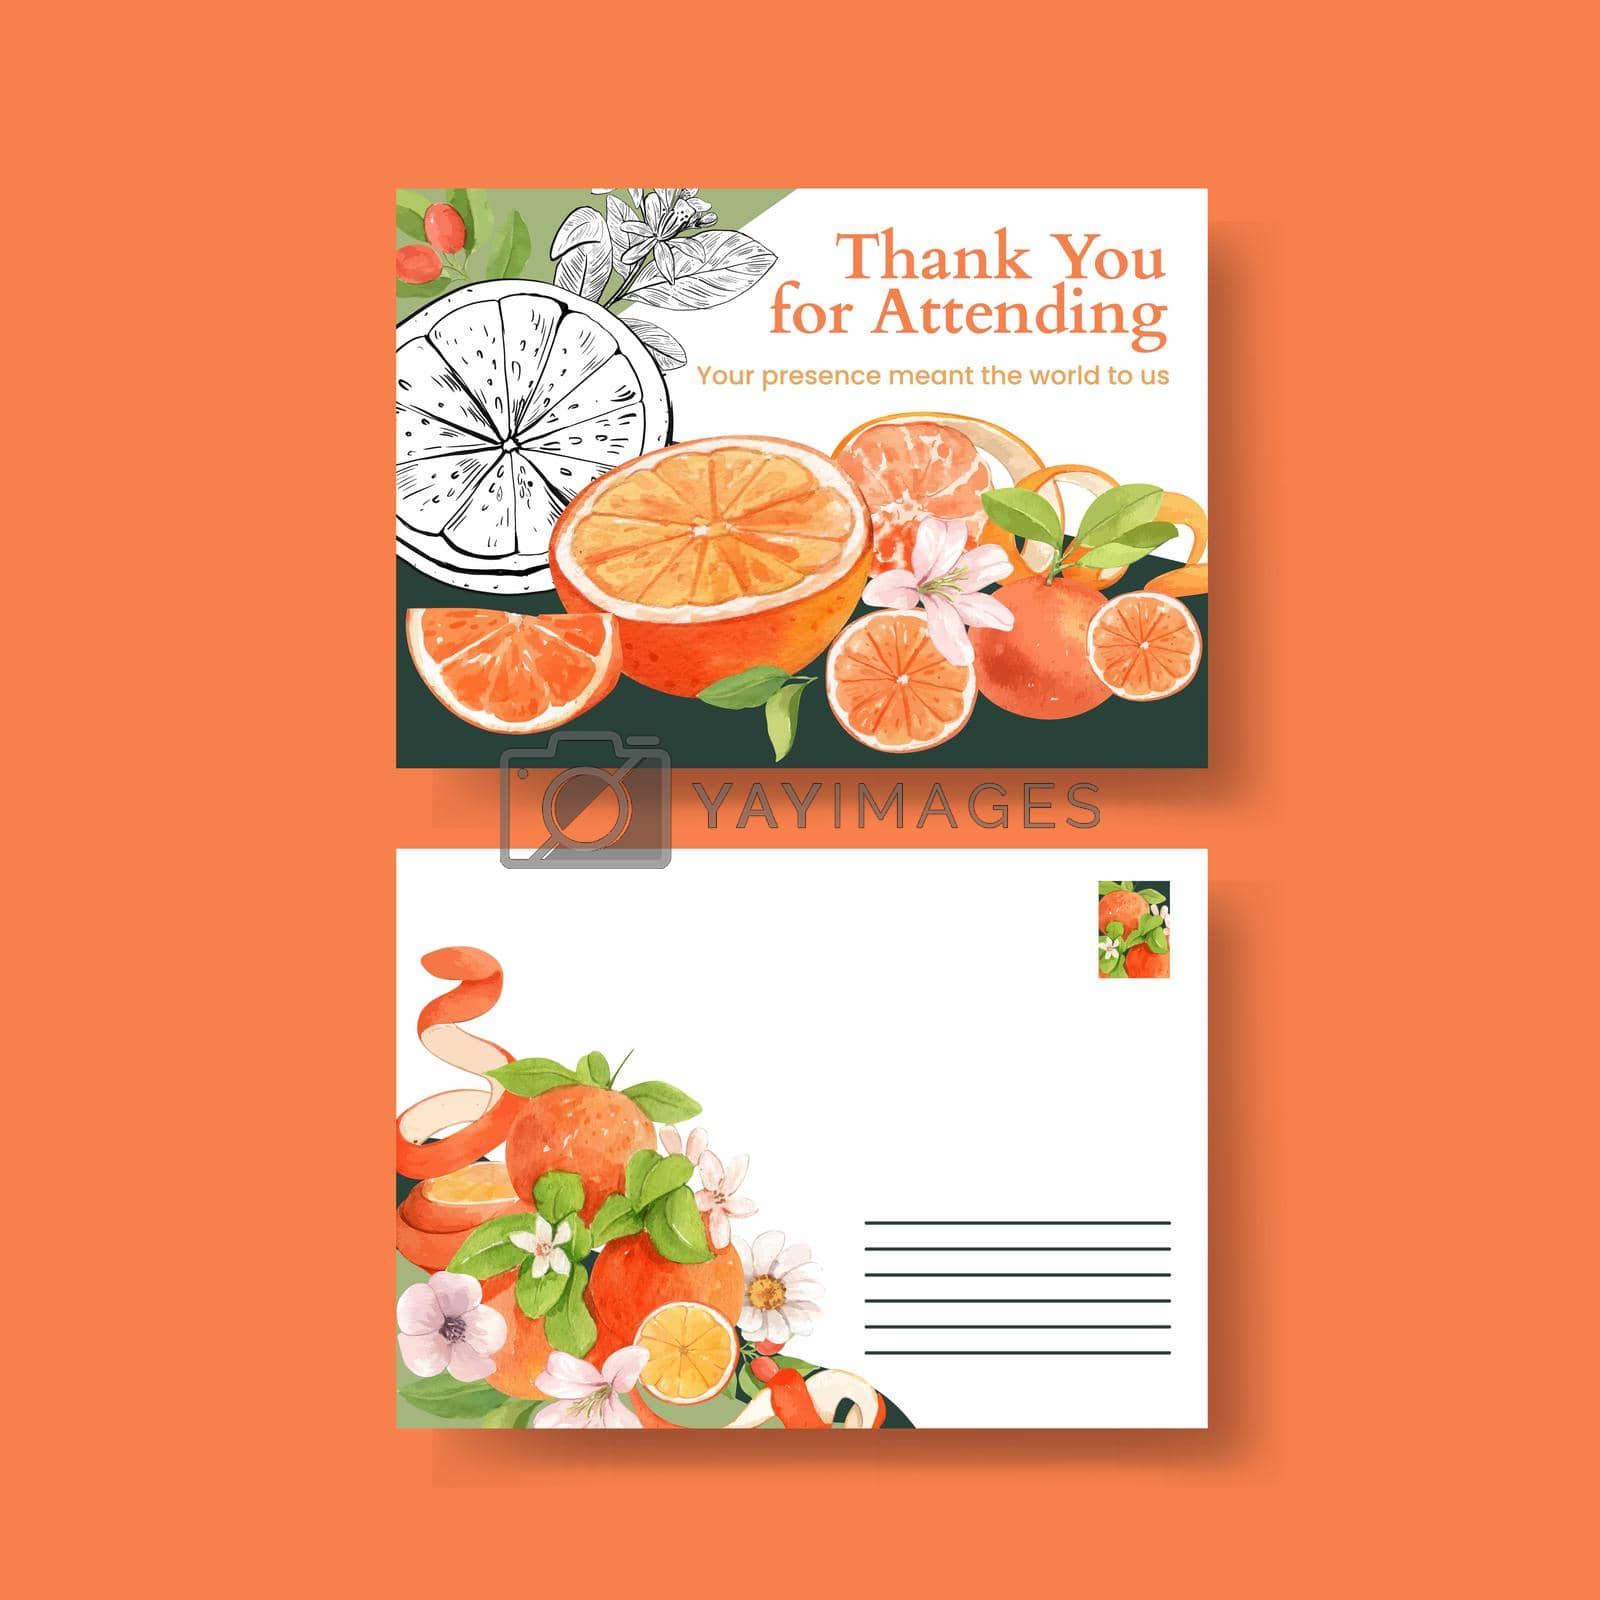 Royalty free image of Poster template with orange grapefruit concept,watercolor by Photographeeasia